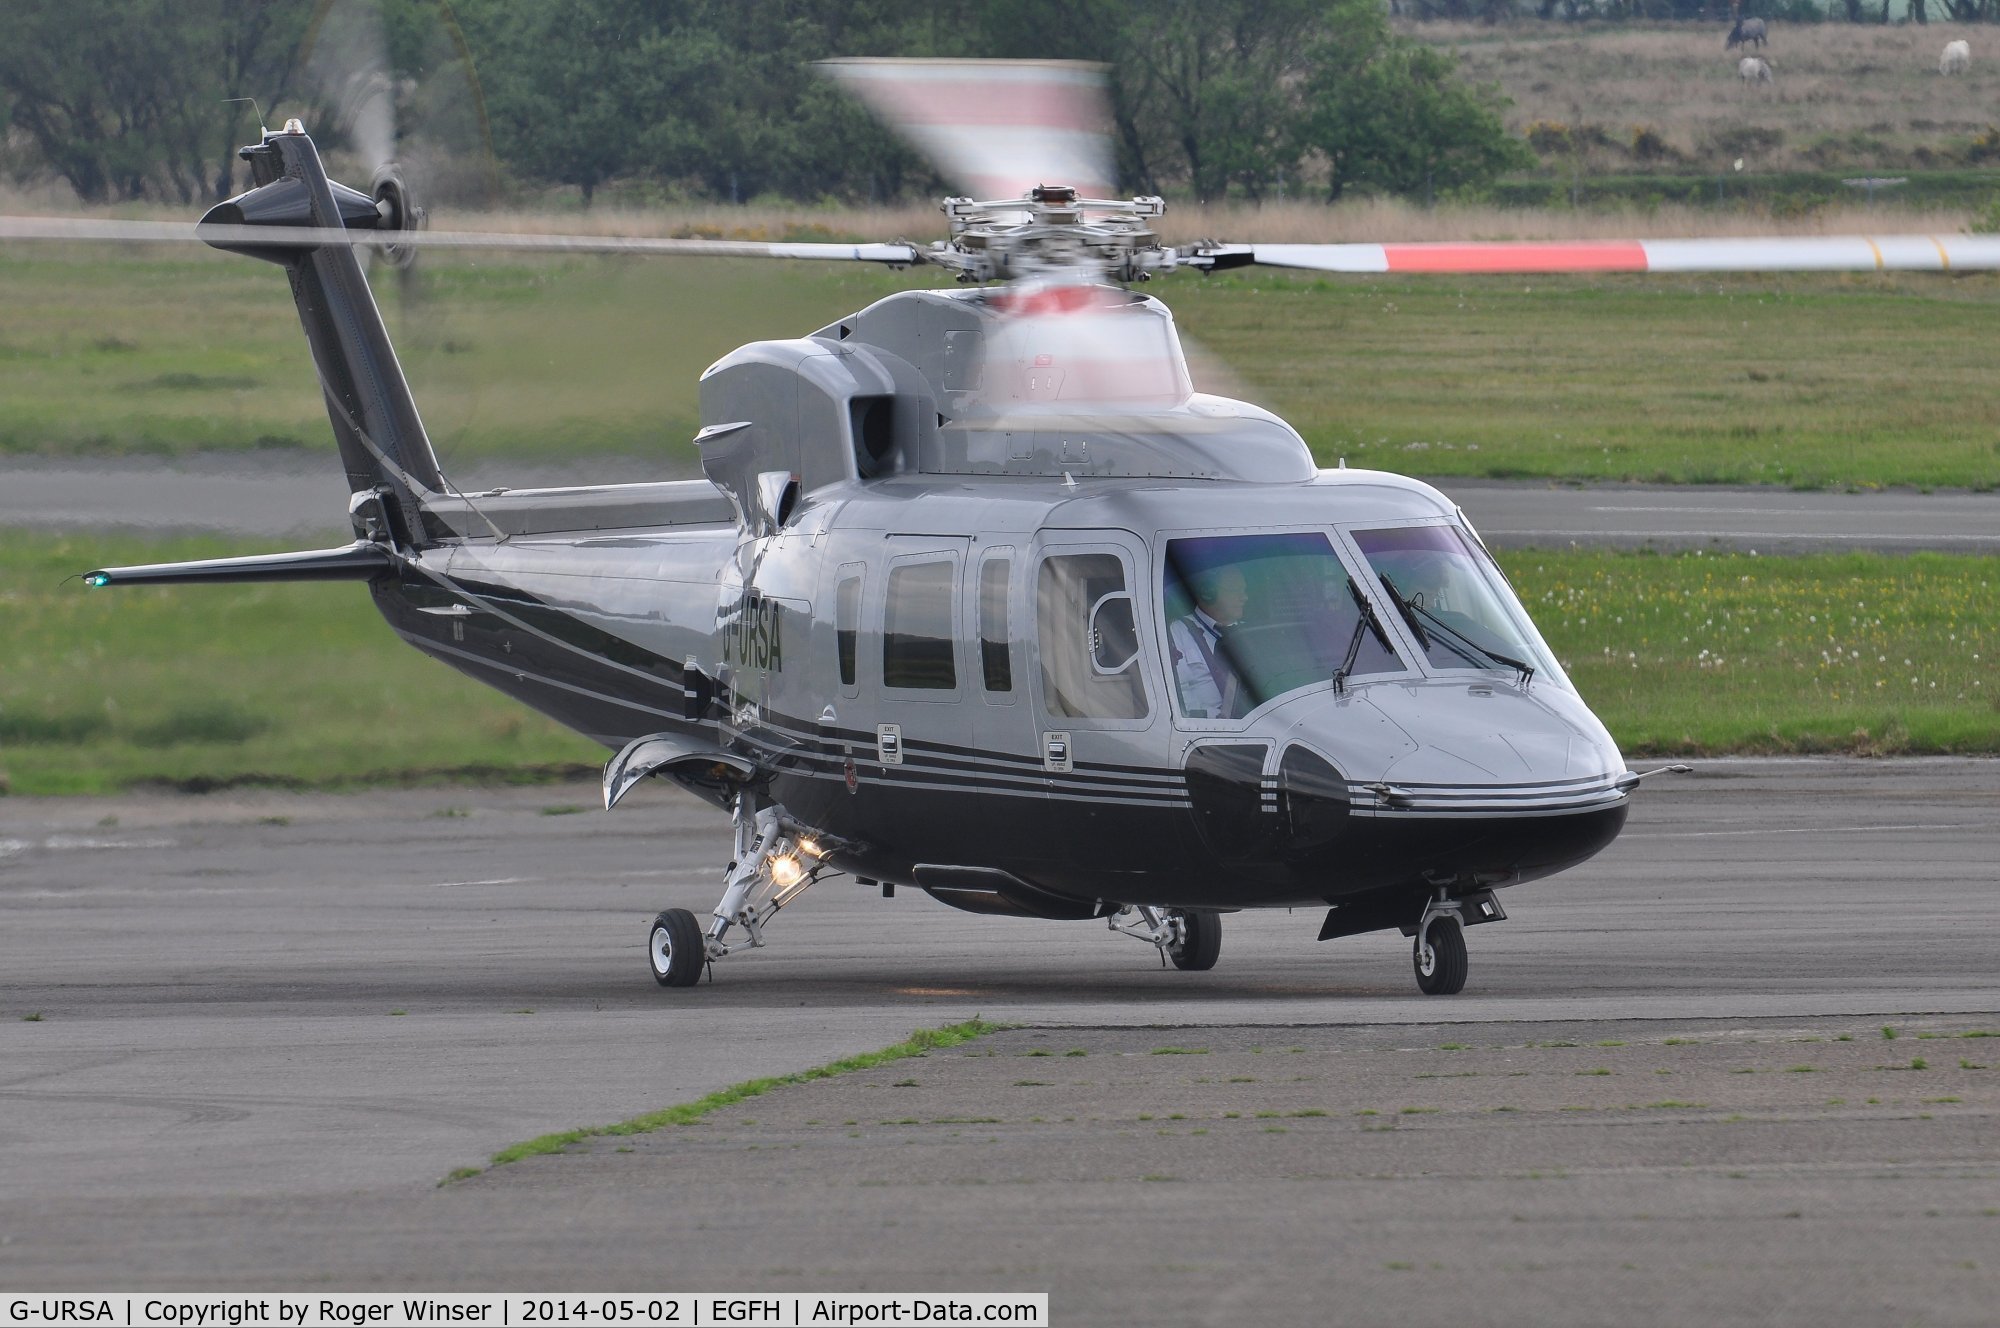 G-URSA, 2007 Sikorsky S-76C C/N 760699, Visiting S-76 operated by Capital Air Services. Previously registered N2582J.